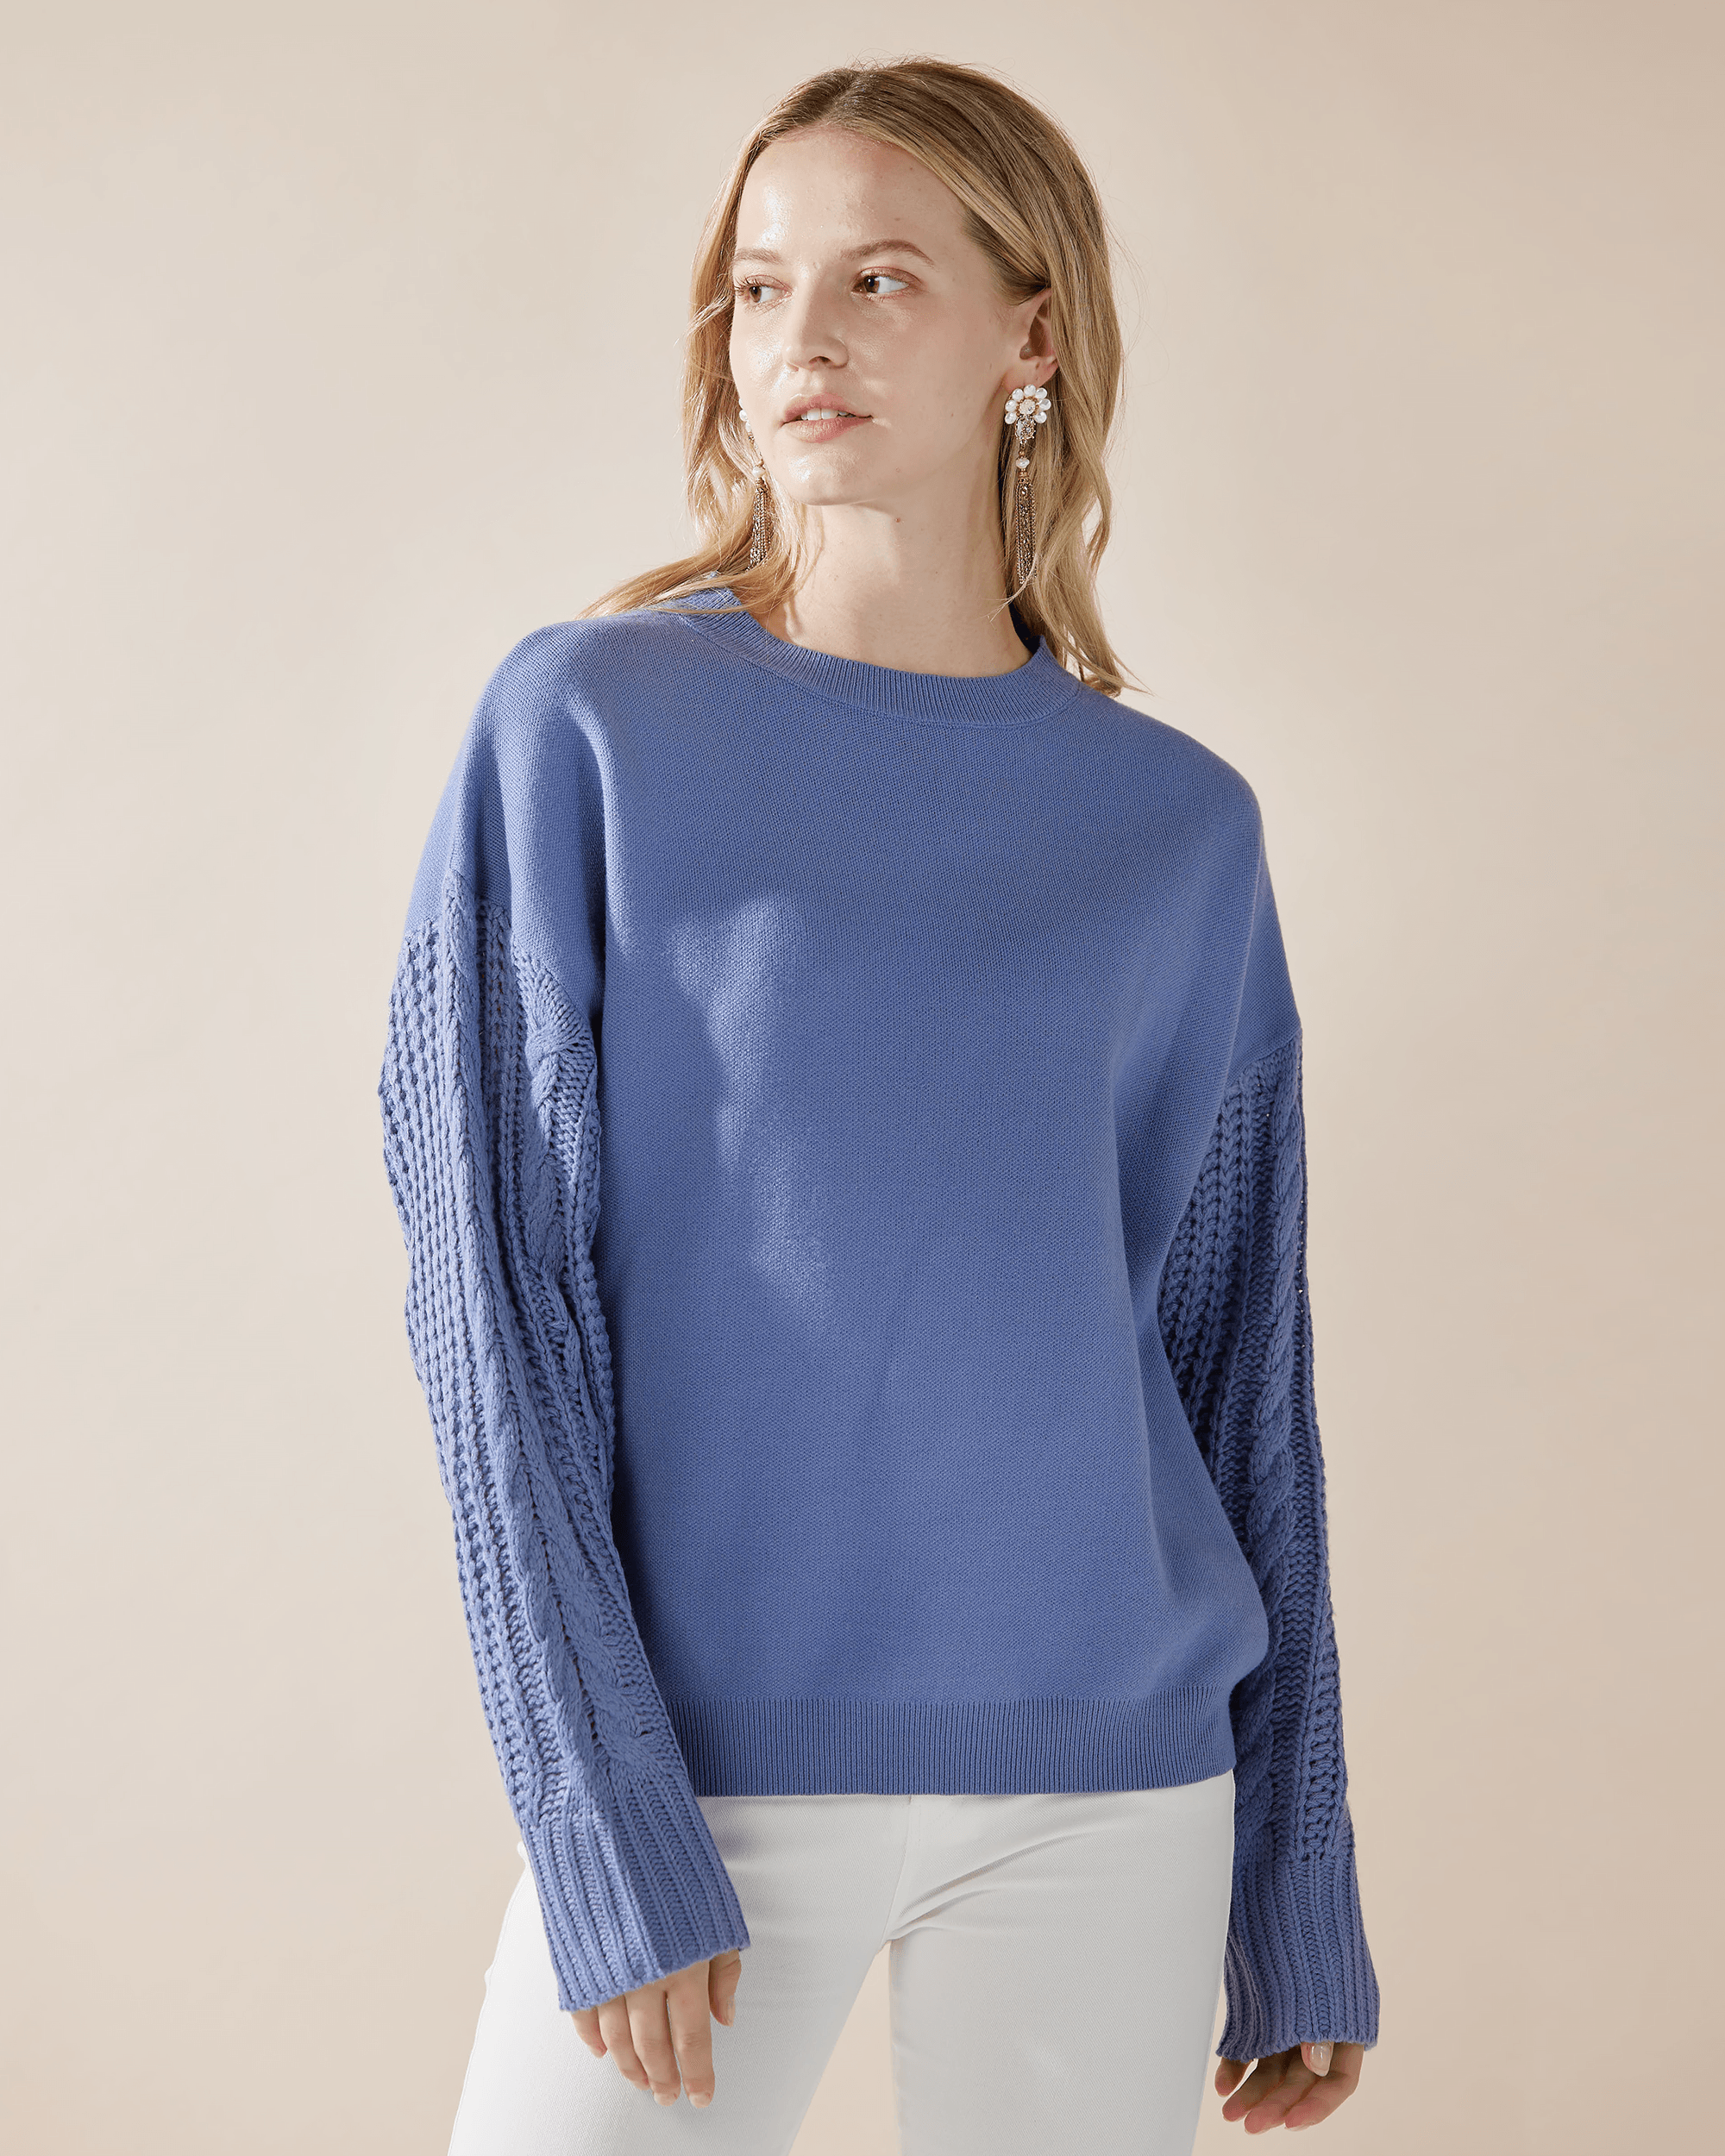 Denim Blue Sweater: Trendy Cable Knit